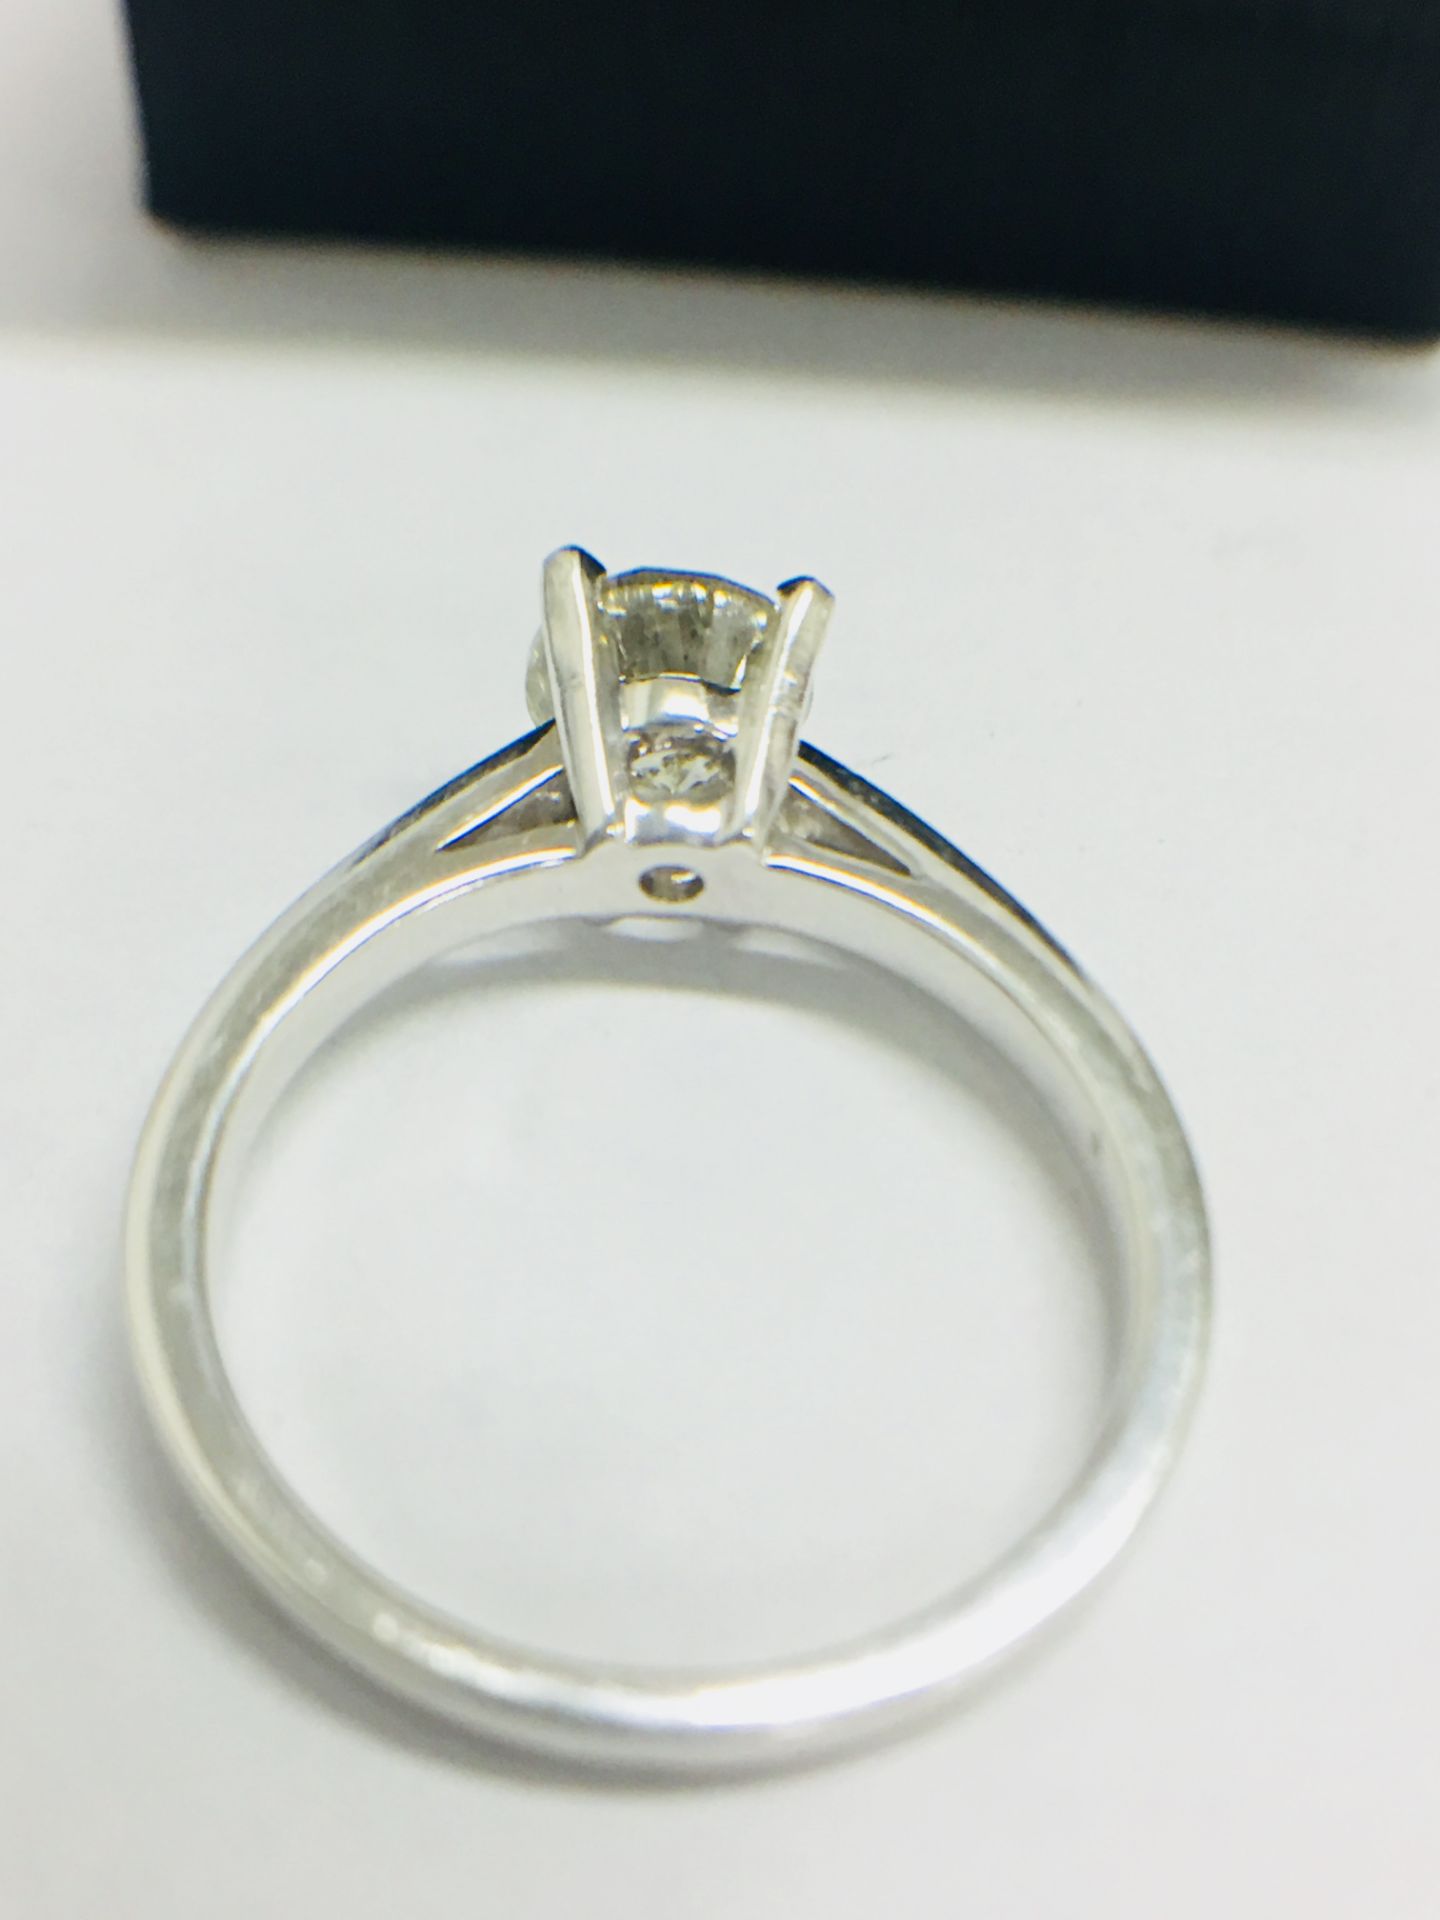 1.23Ct Diamond Solitaire Ring With A Brilliant Cut Diamond. - Image 5 of 8